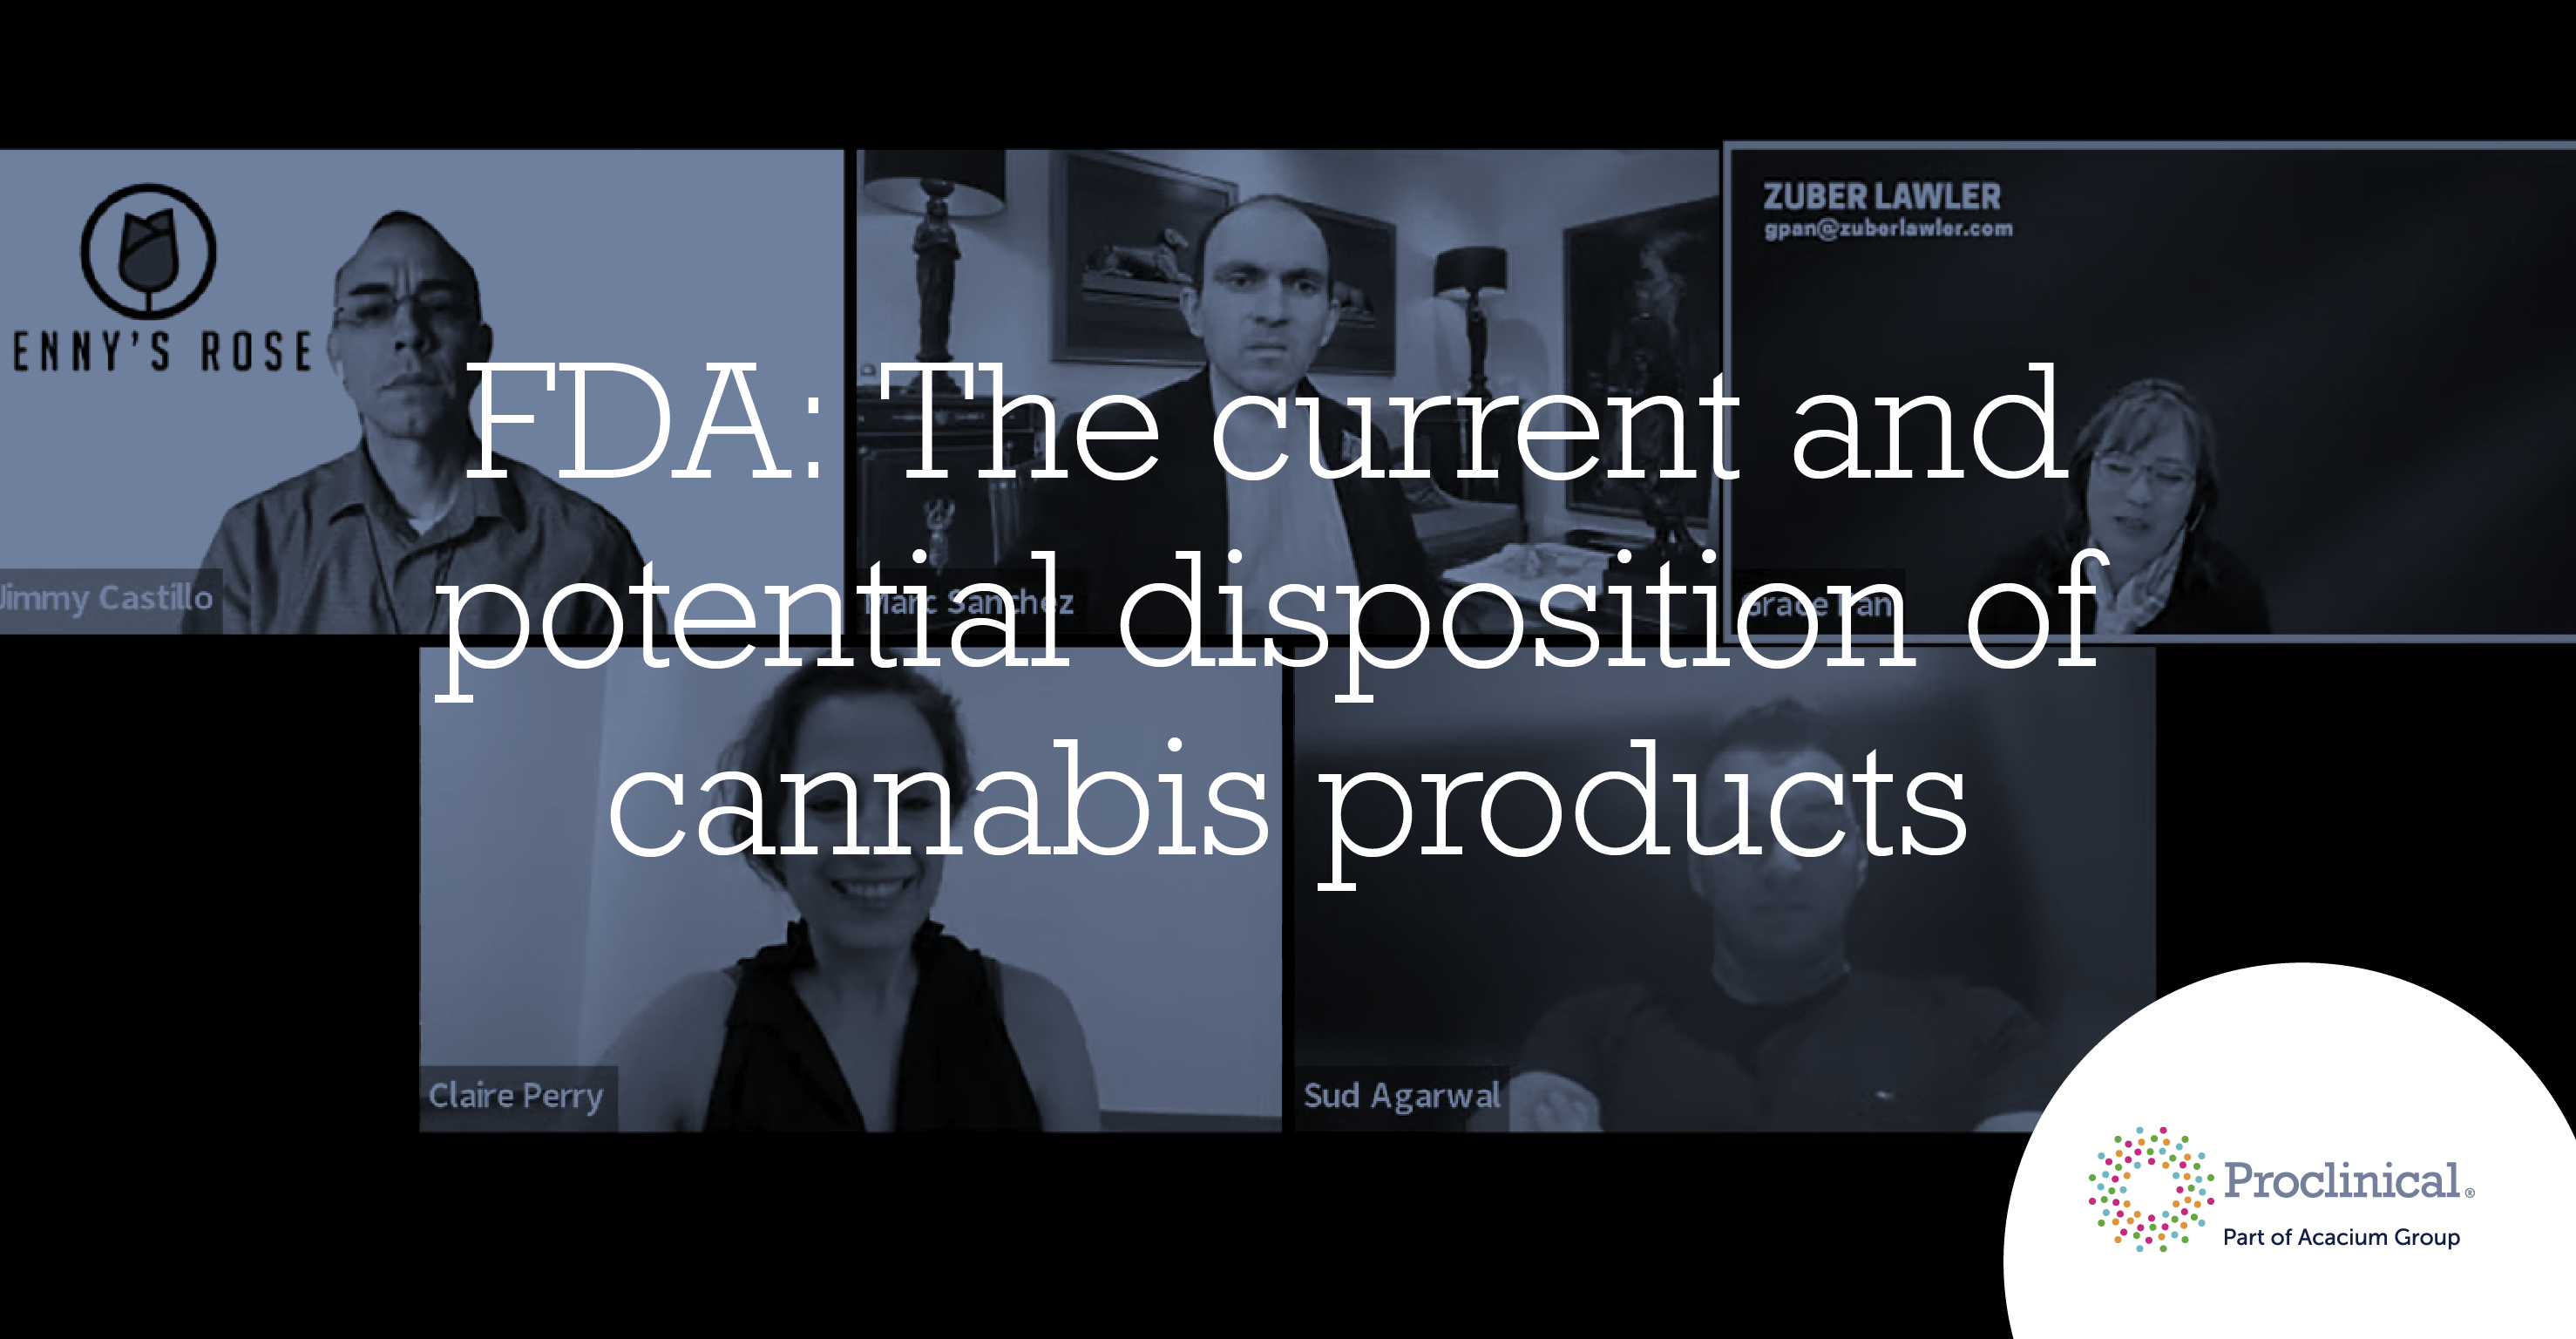 (VIDEO) FDA: The current and potential disposition of cannabis products